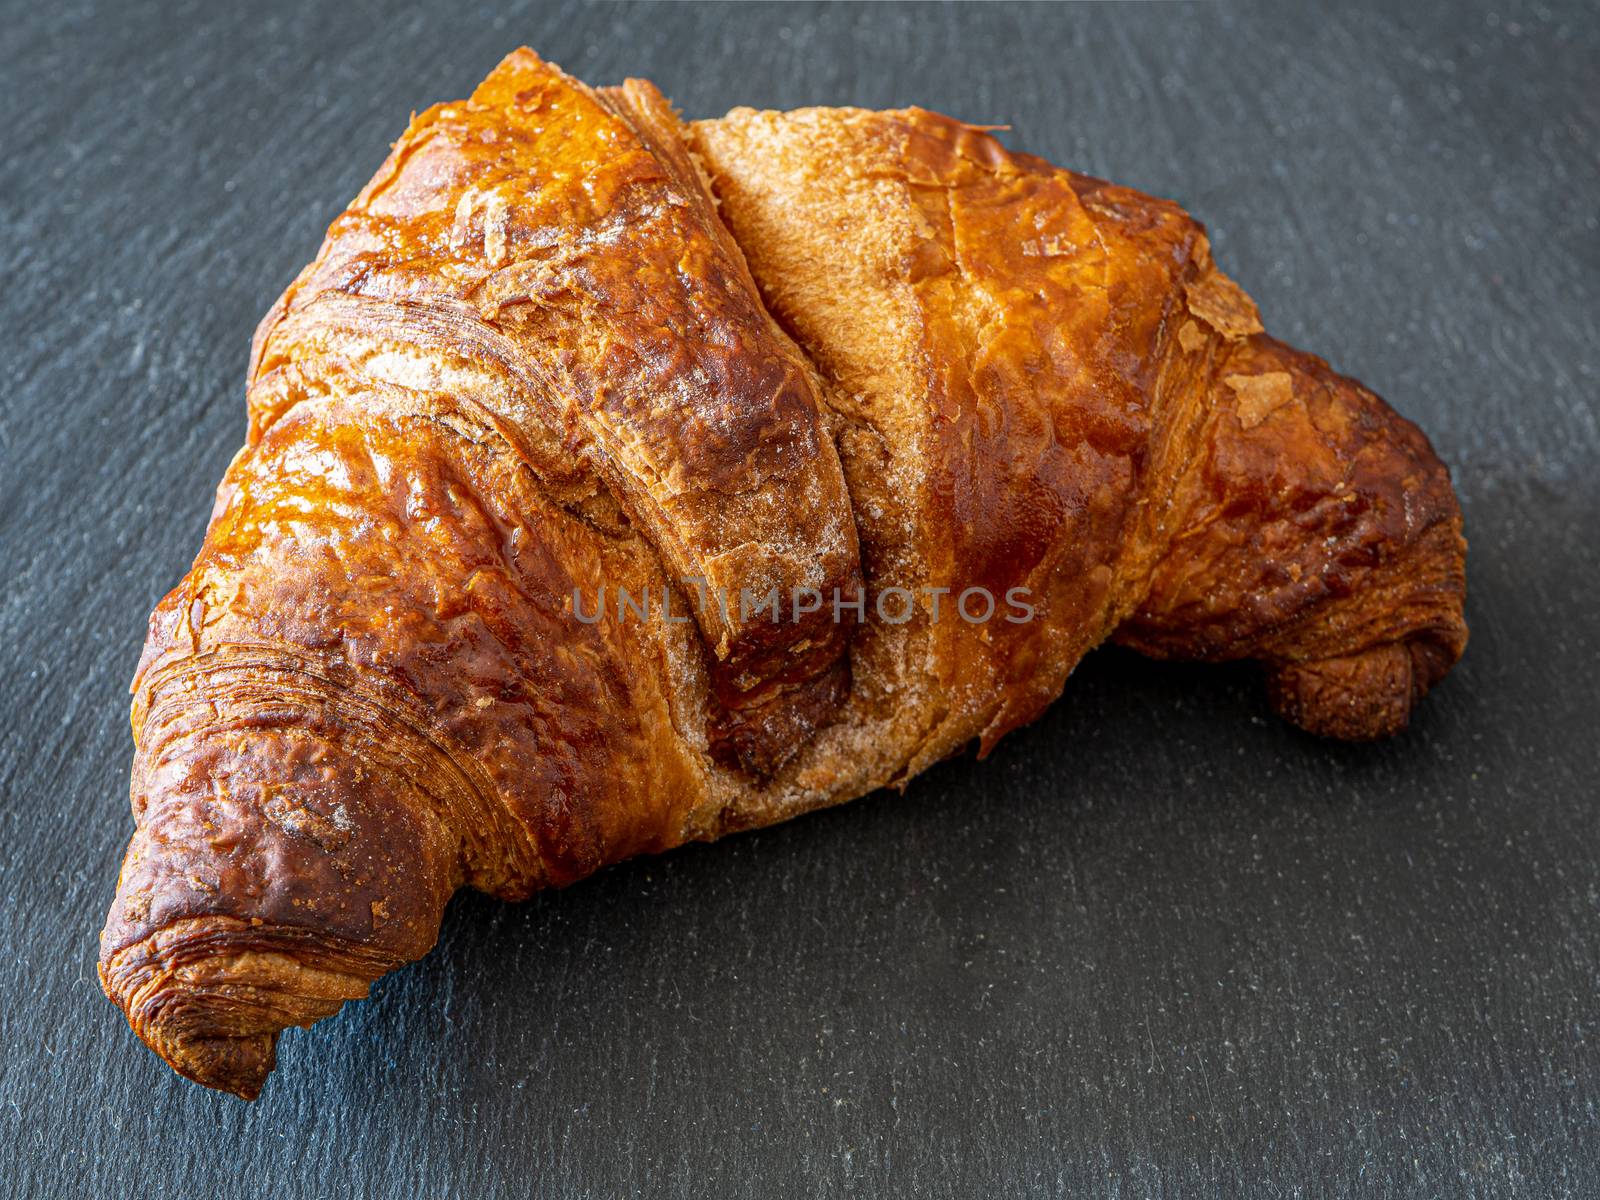 Traditional croissant placed on a dark plate, a typical dessert similar to the Italian Cornetto